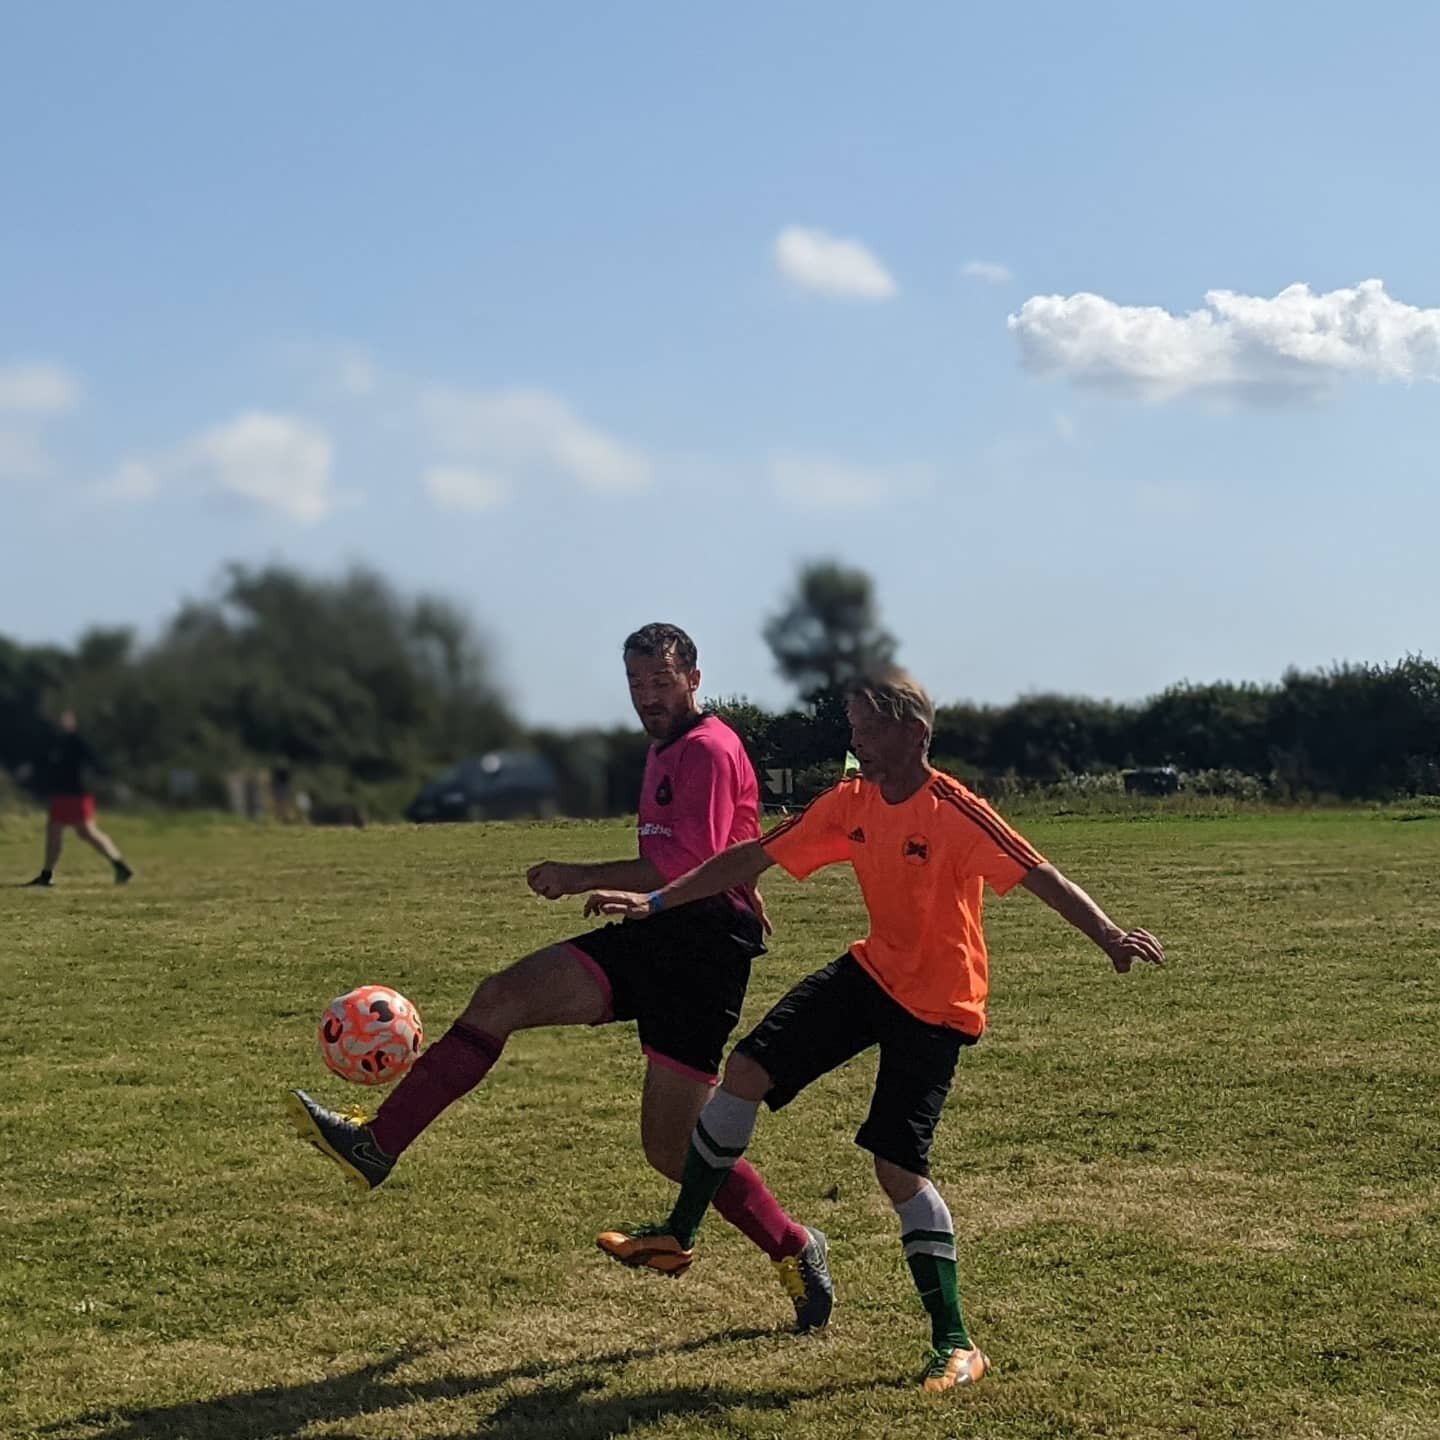 A few more shots of the prawns in action this weekend. We didn't win but football and dancing are the real winners. Another excellent @oncewest21
.
.
.
.
#putitinthemixer #football #westcountry #bantham #carpentry #